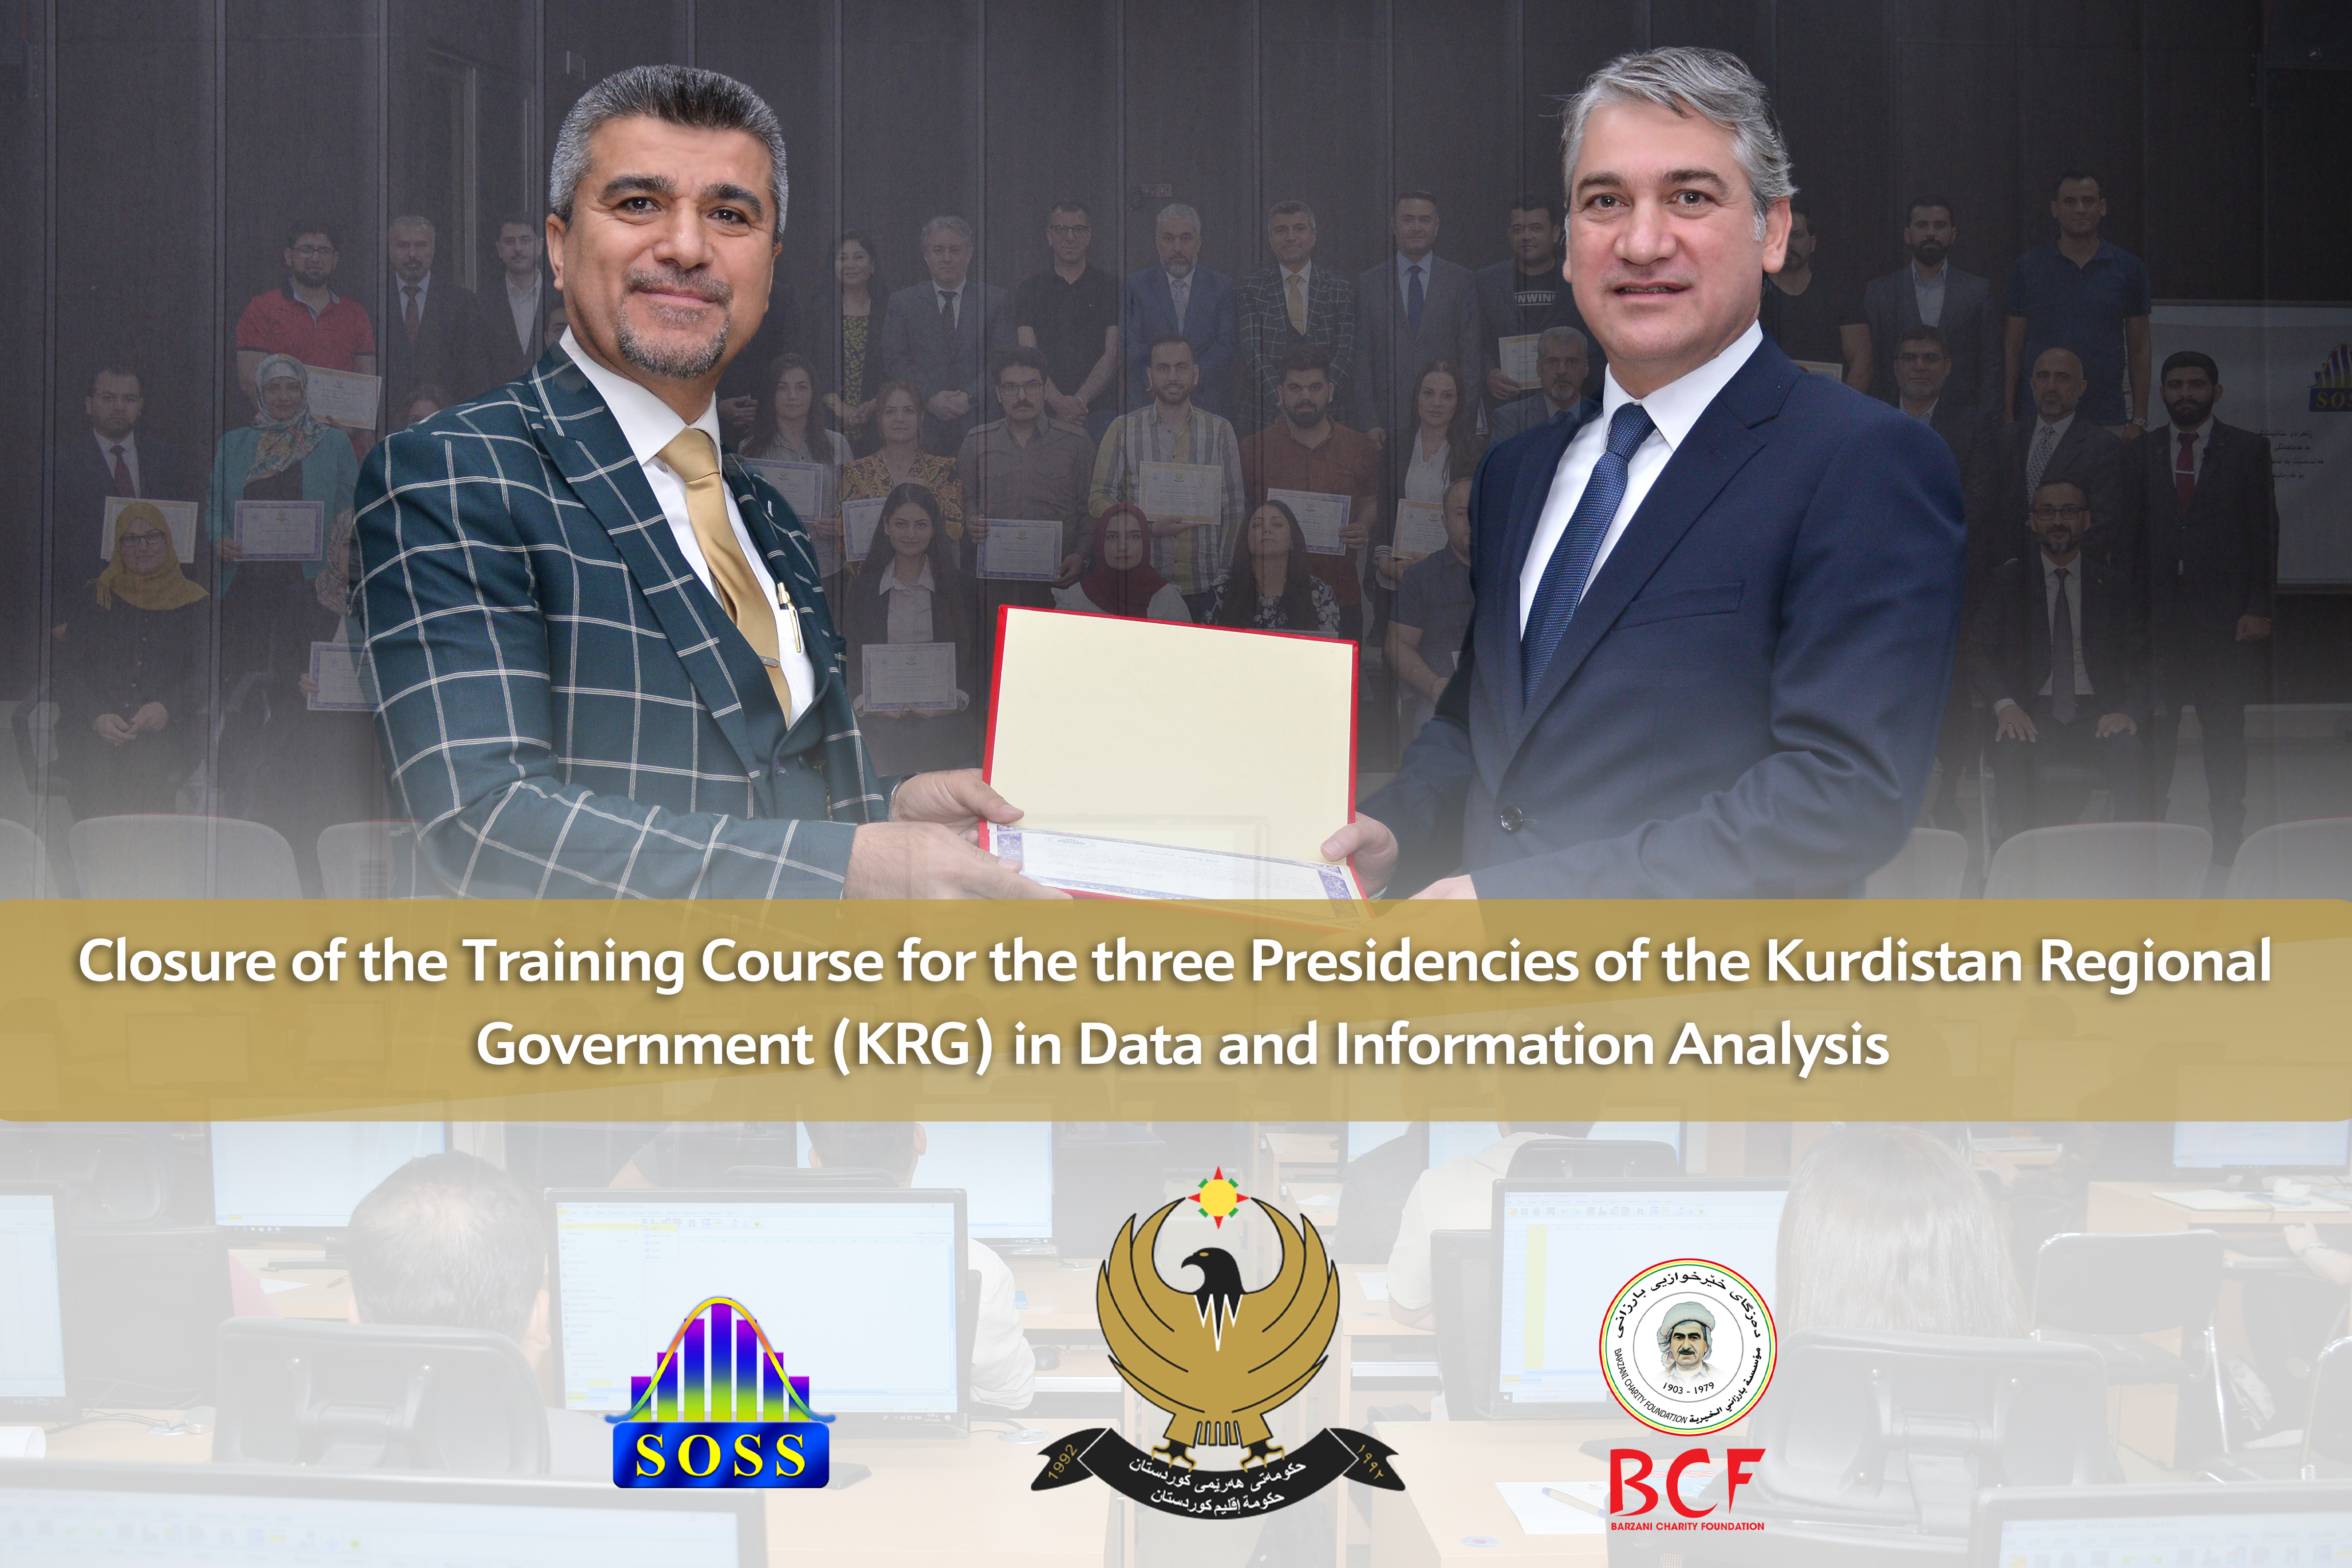 Closure of the Training Course for the three Presidencies of the Kurdistan Regional Government (KRG) in Data and Information Analysis